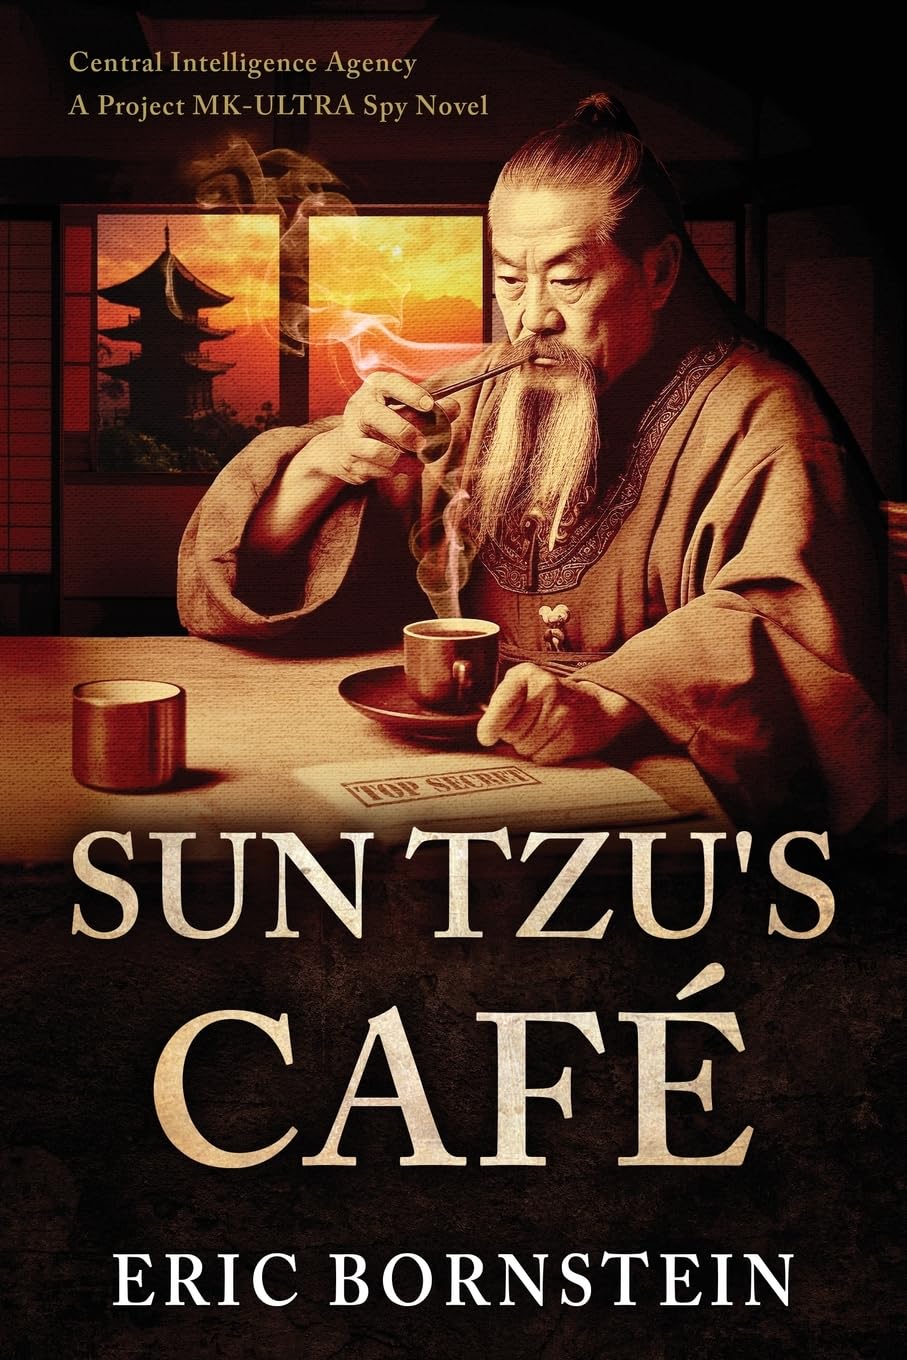 New novel "Sun Tzu’s Café" by Eric Bornstein is released, a thrilling work of historical fiction that tells a taut story of espionage, secret government programs, and revenge